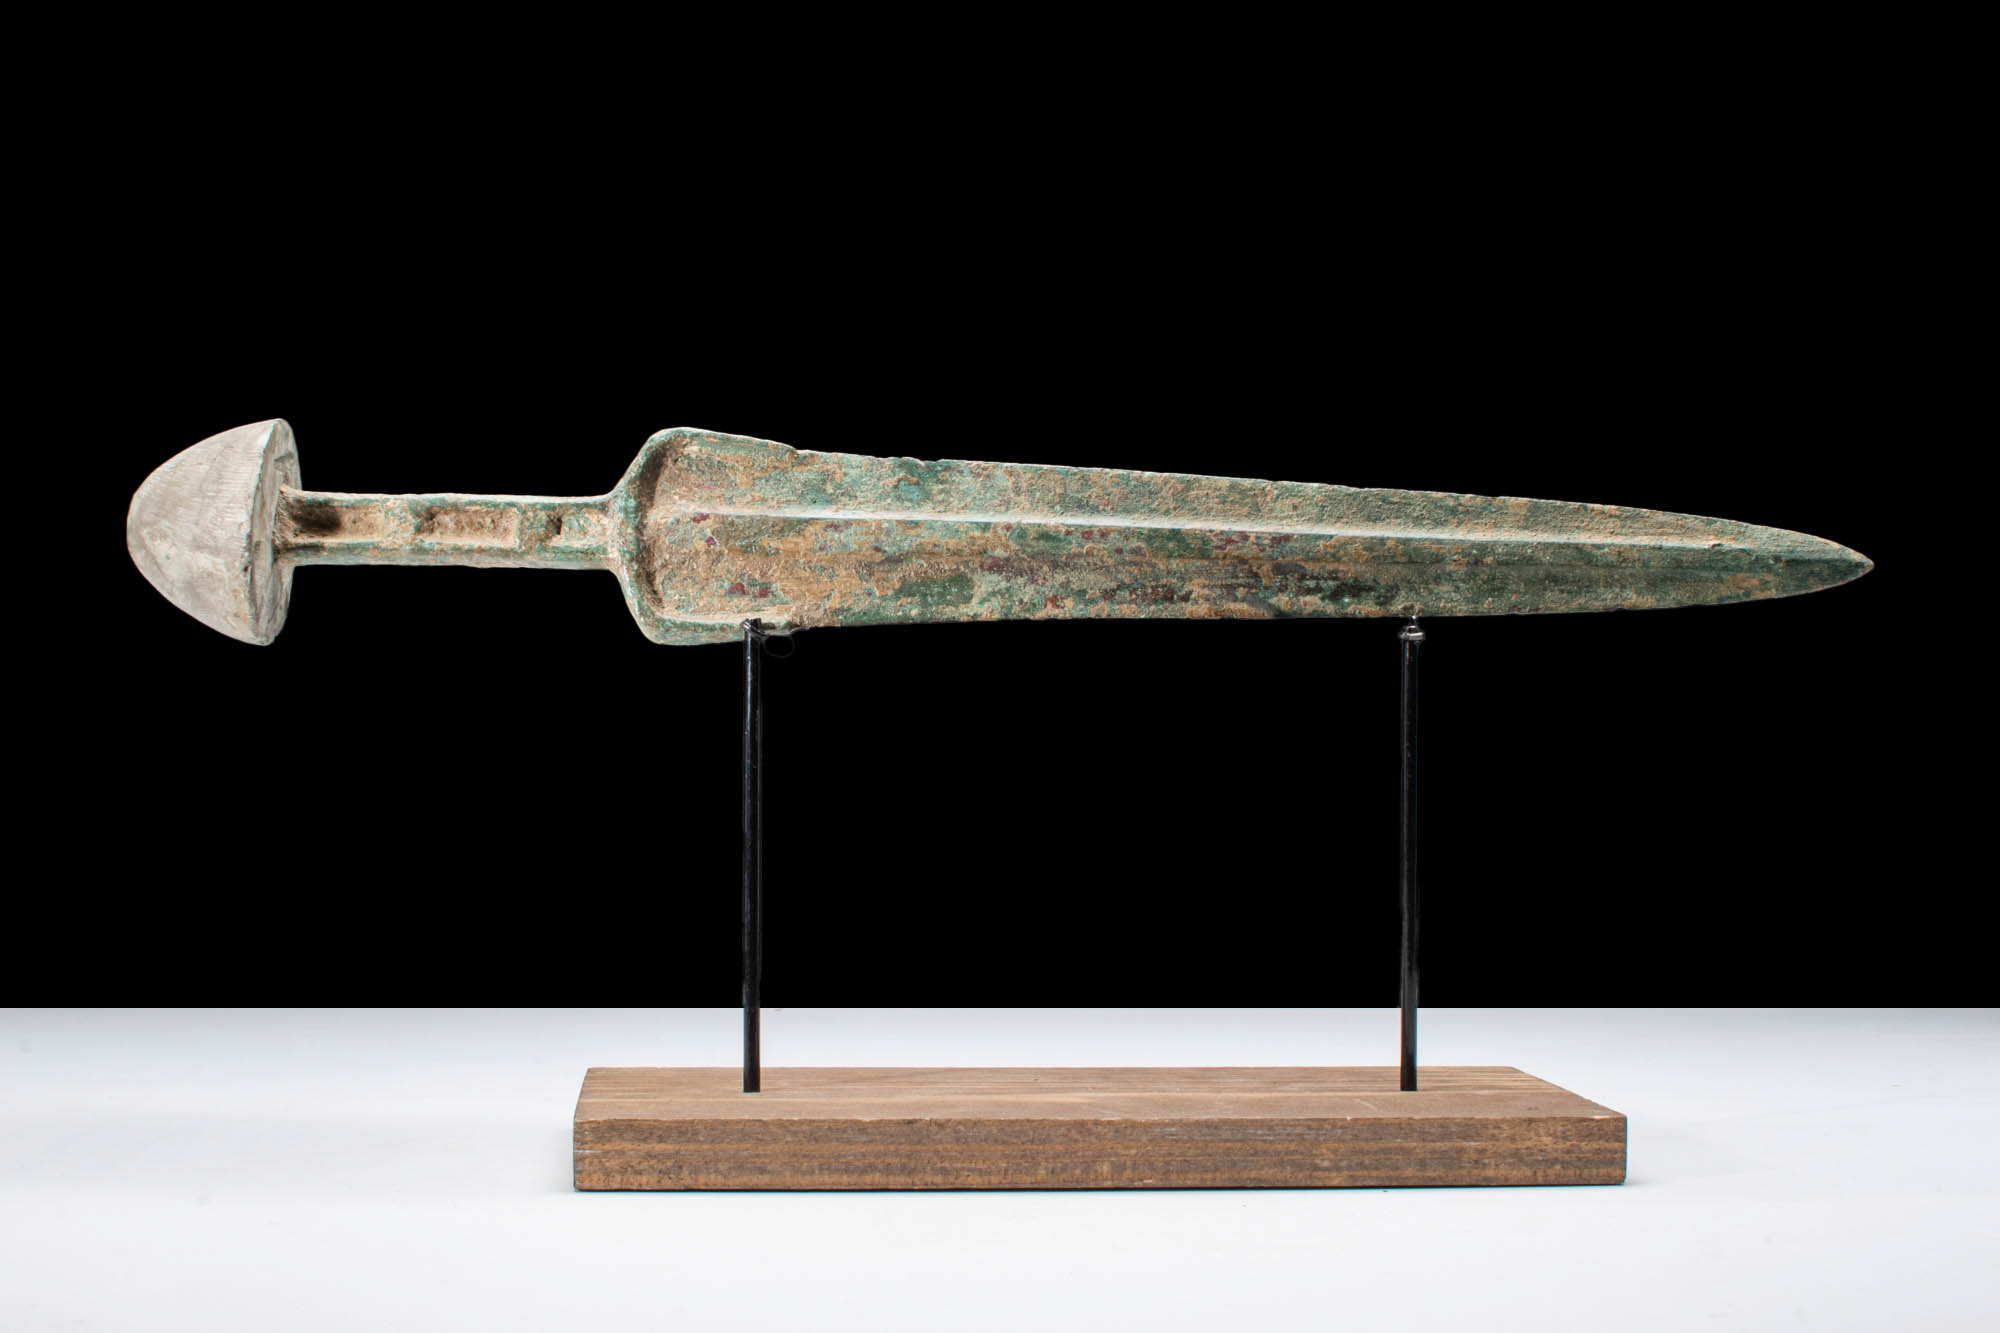 ANCIENT BRONZE SWORD WITH STONE POMMEL - Image 2 of 4